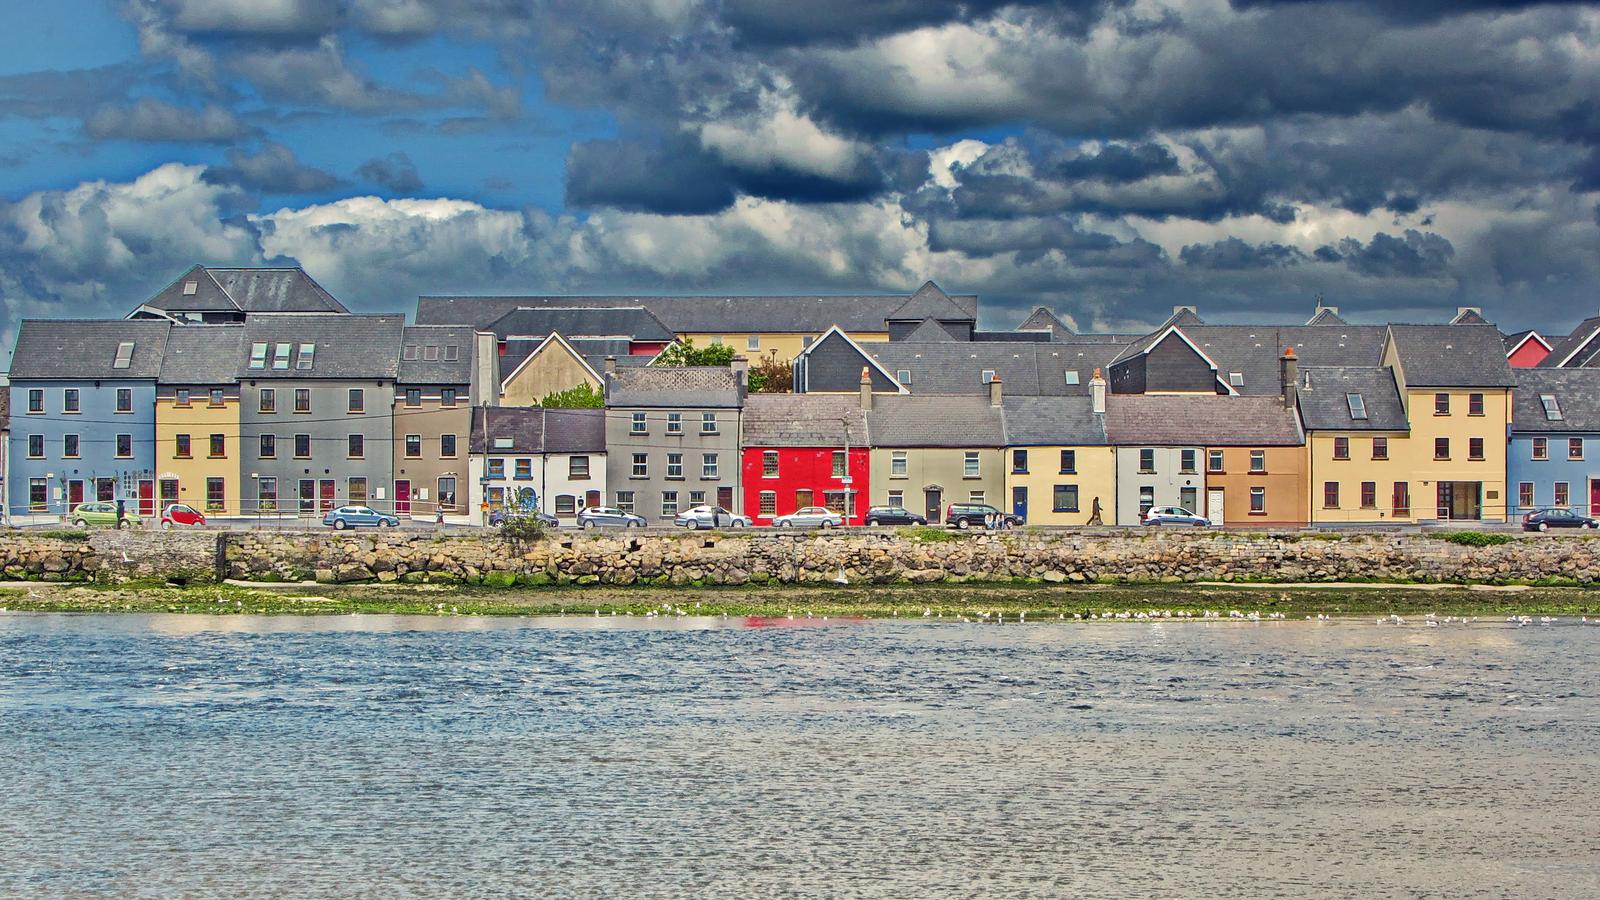 Can You Pass This Geography Quiz Where Every Question Comes With a 🐶 Dog-Related Clue? Galway